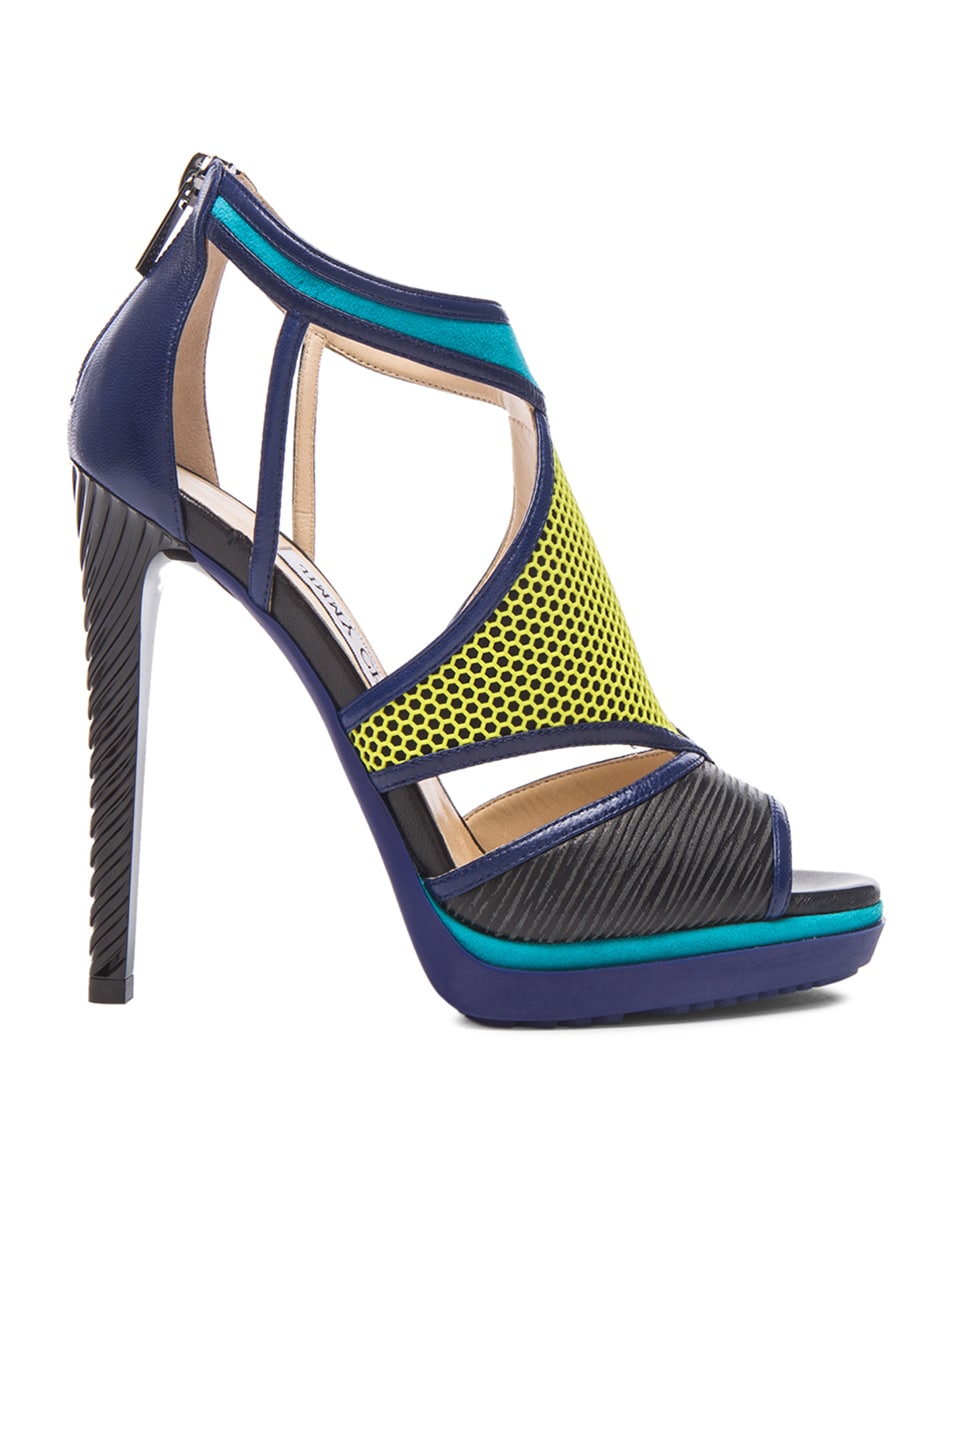 Image 1 of Jimmy Choo Lythe Leather Heels in Acid Yellow, Black & Turquoise